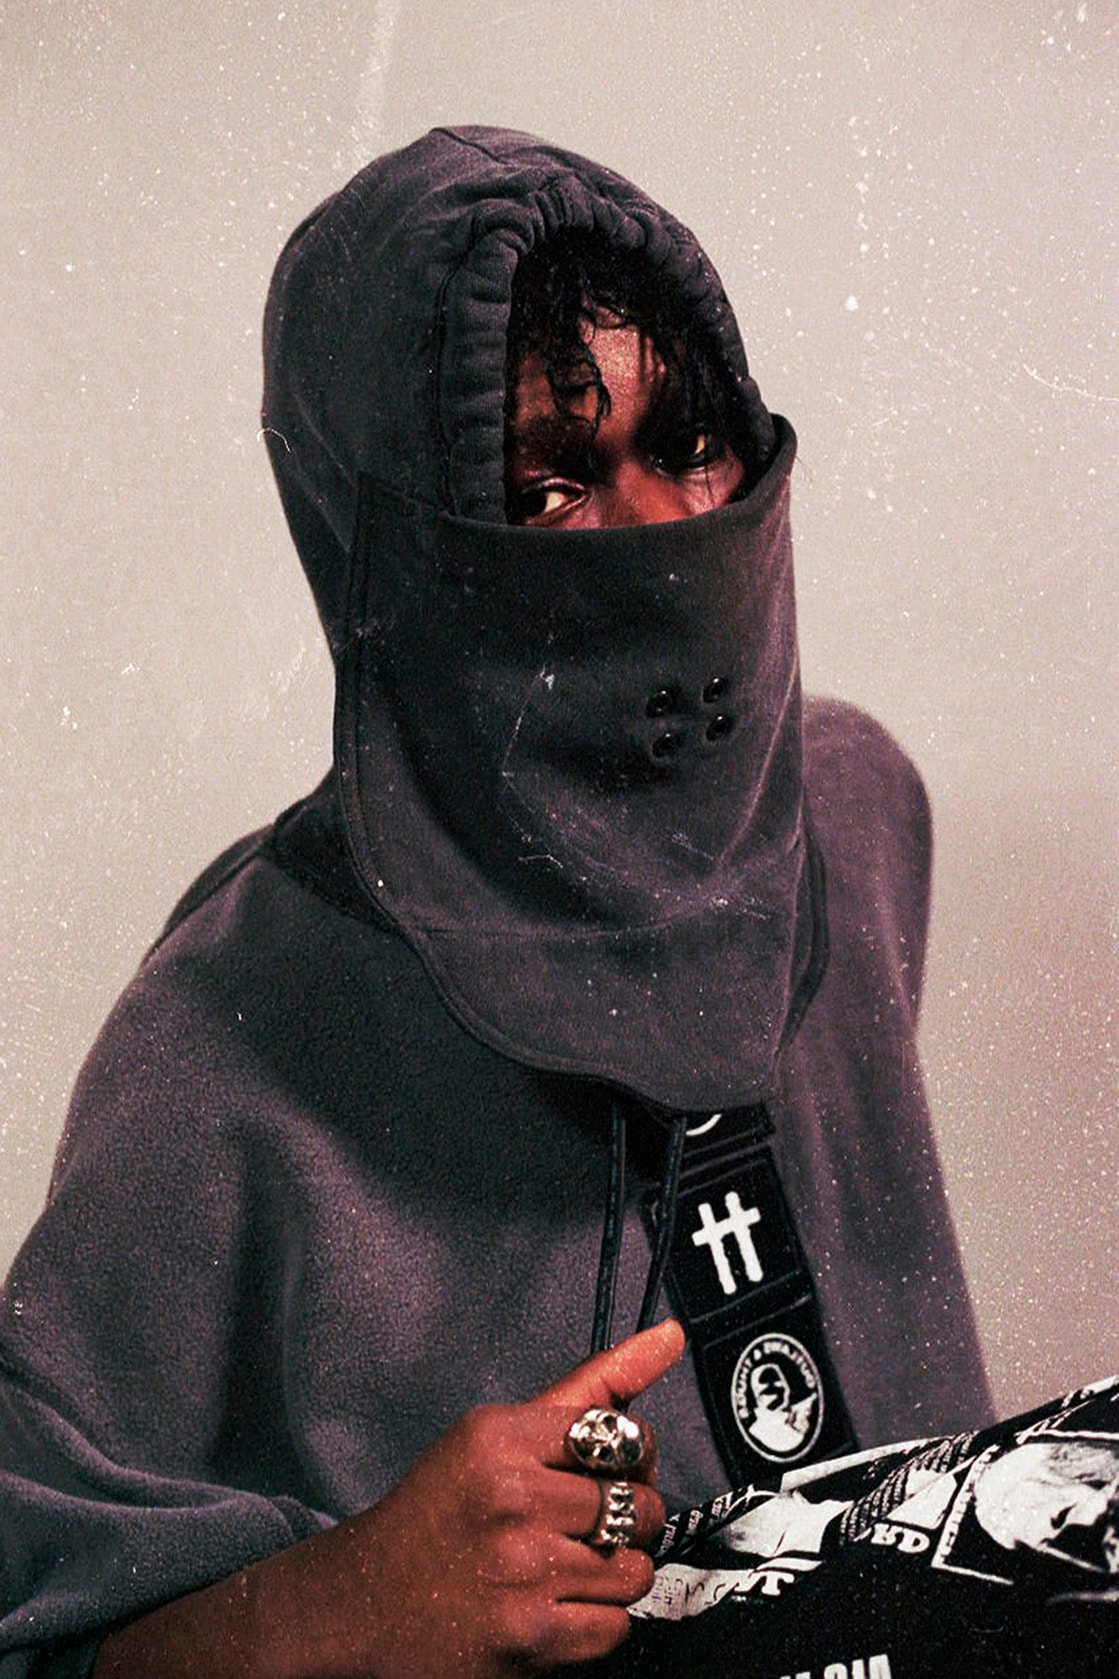 Armour In Heaven x GAIKA Collection AIH The Spectacular Uniform Collection Sweaters Leather Jackets Hoodies Tracksuits Tie Dye Patches